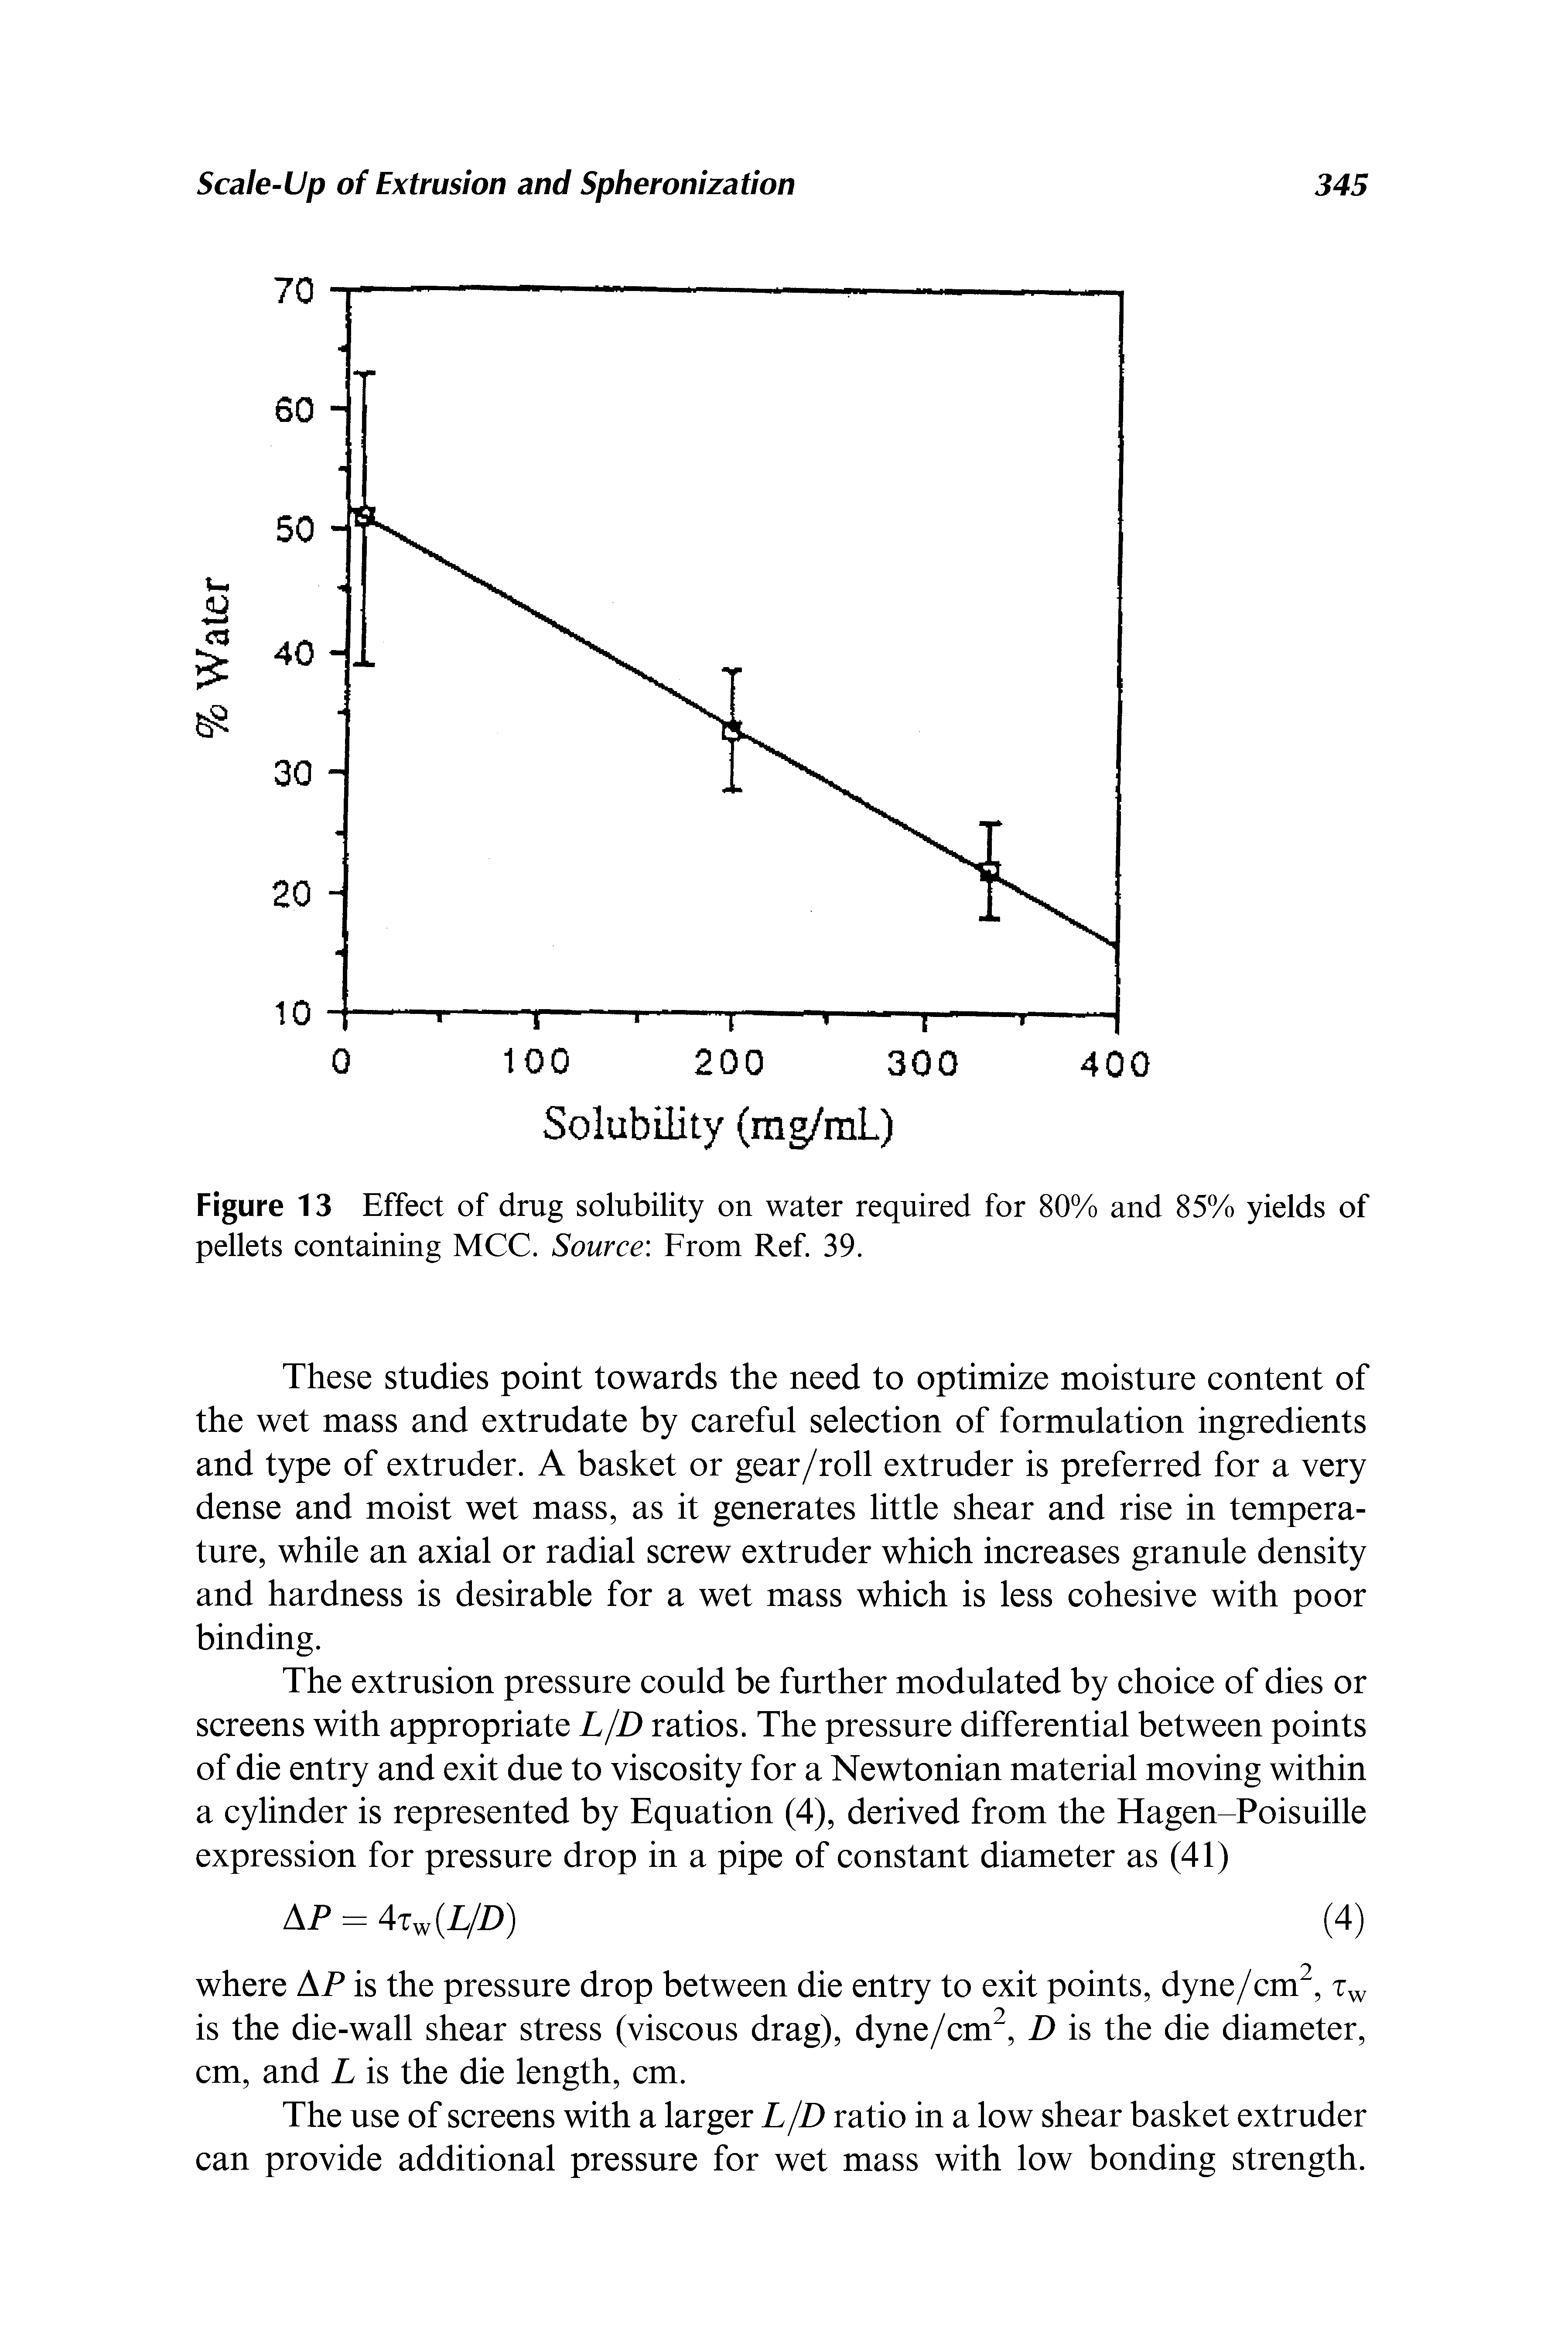 Figure 13 Effect of drug solubility on water required for 80% and 85% yields of pellets containing MCC. Source From Ref. 39.